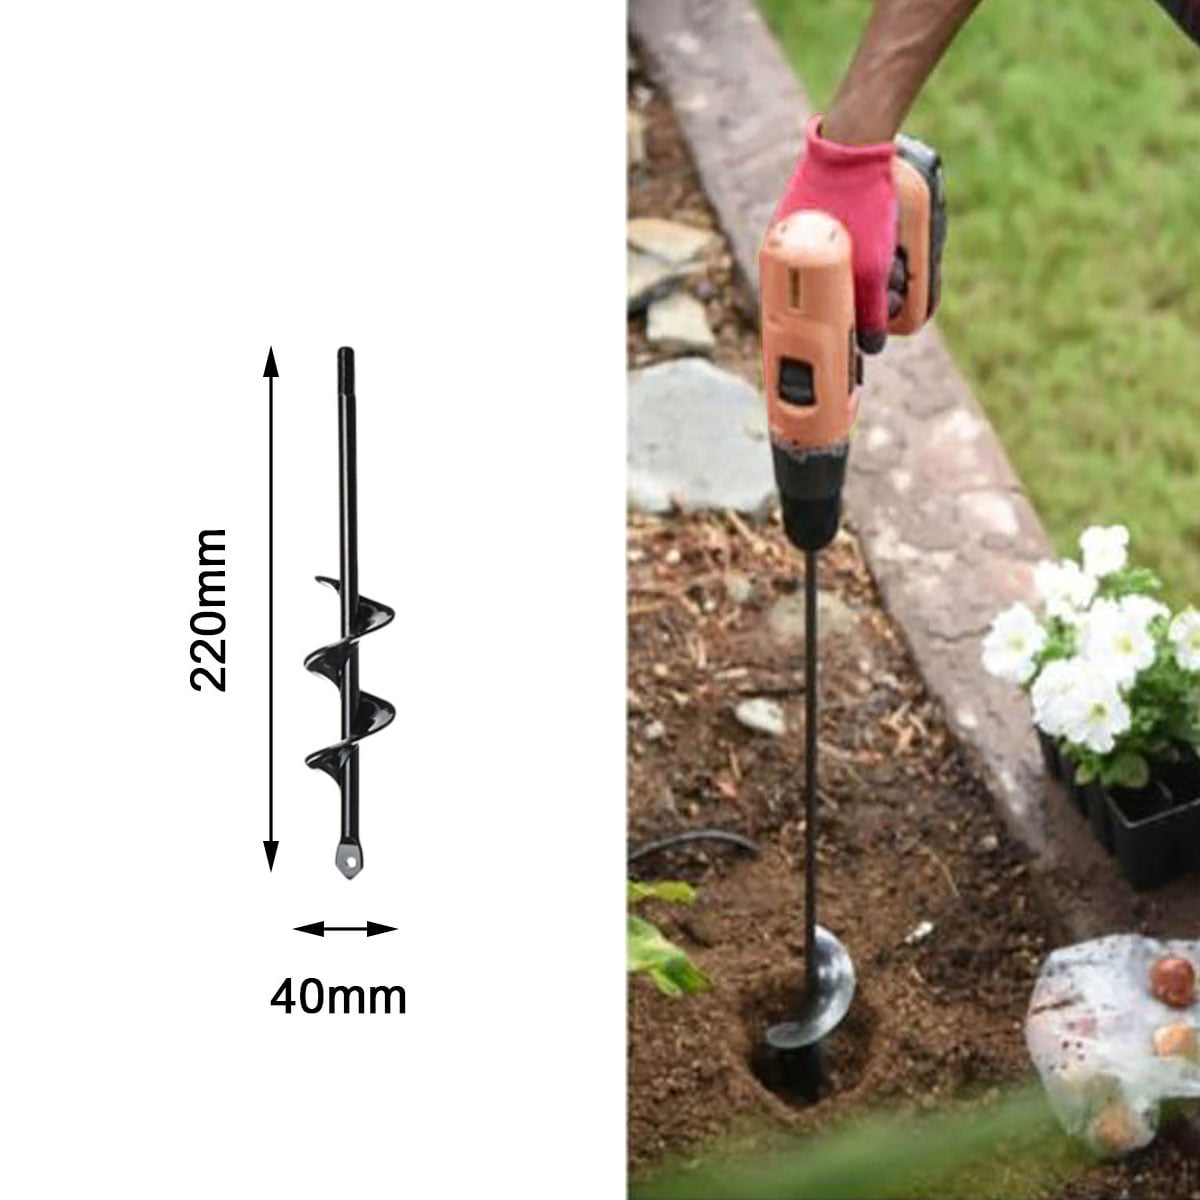 Auger Spiral Hole Garden Planting Drill Bit Small Earth Planter Post Hole Digger 